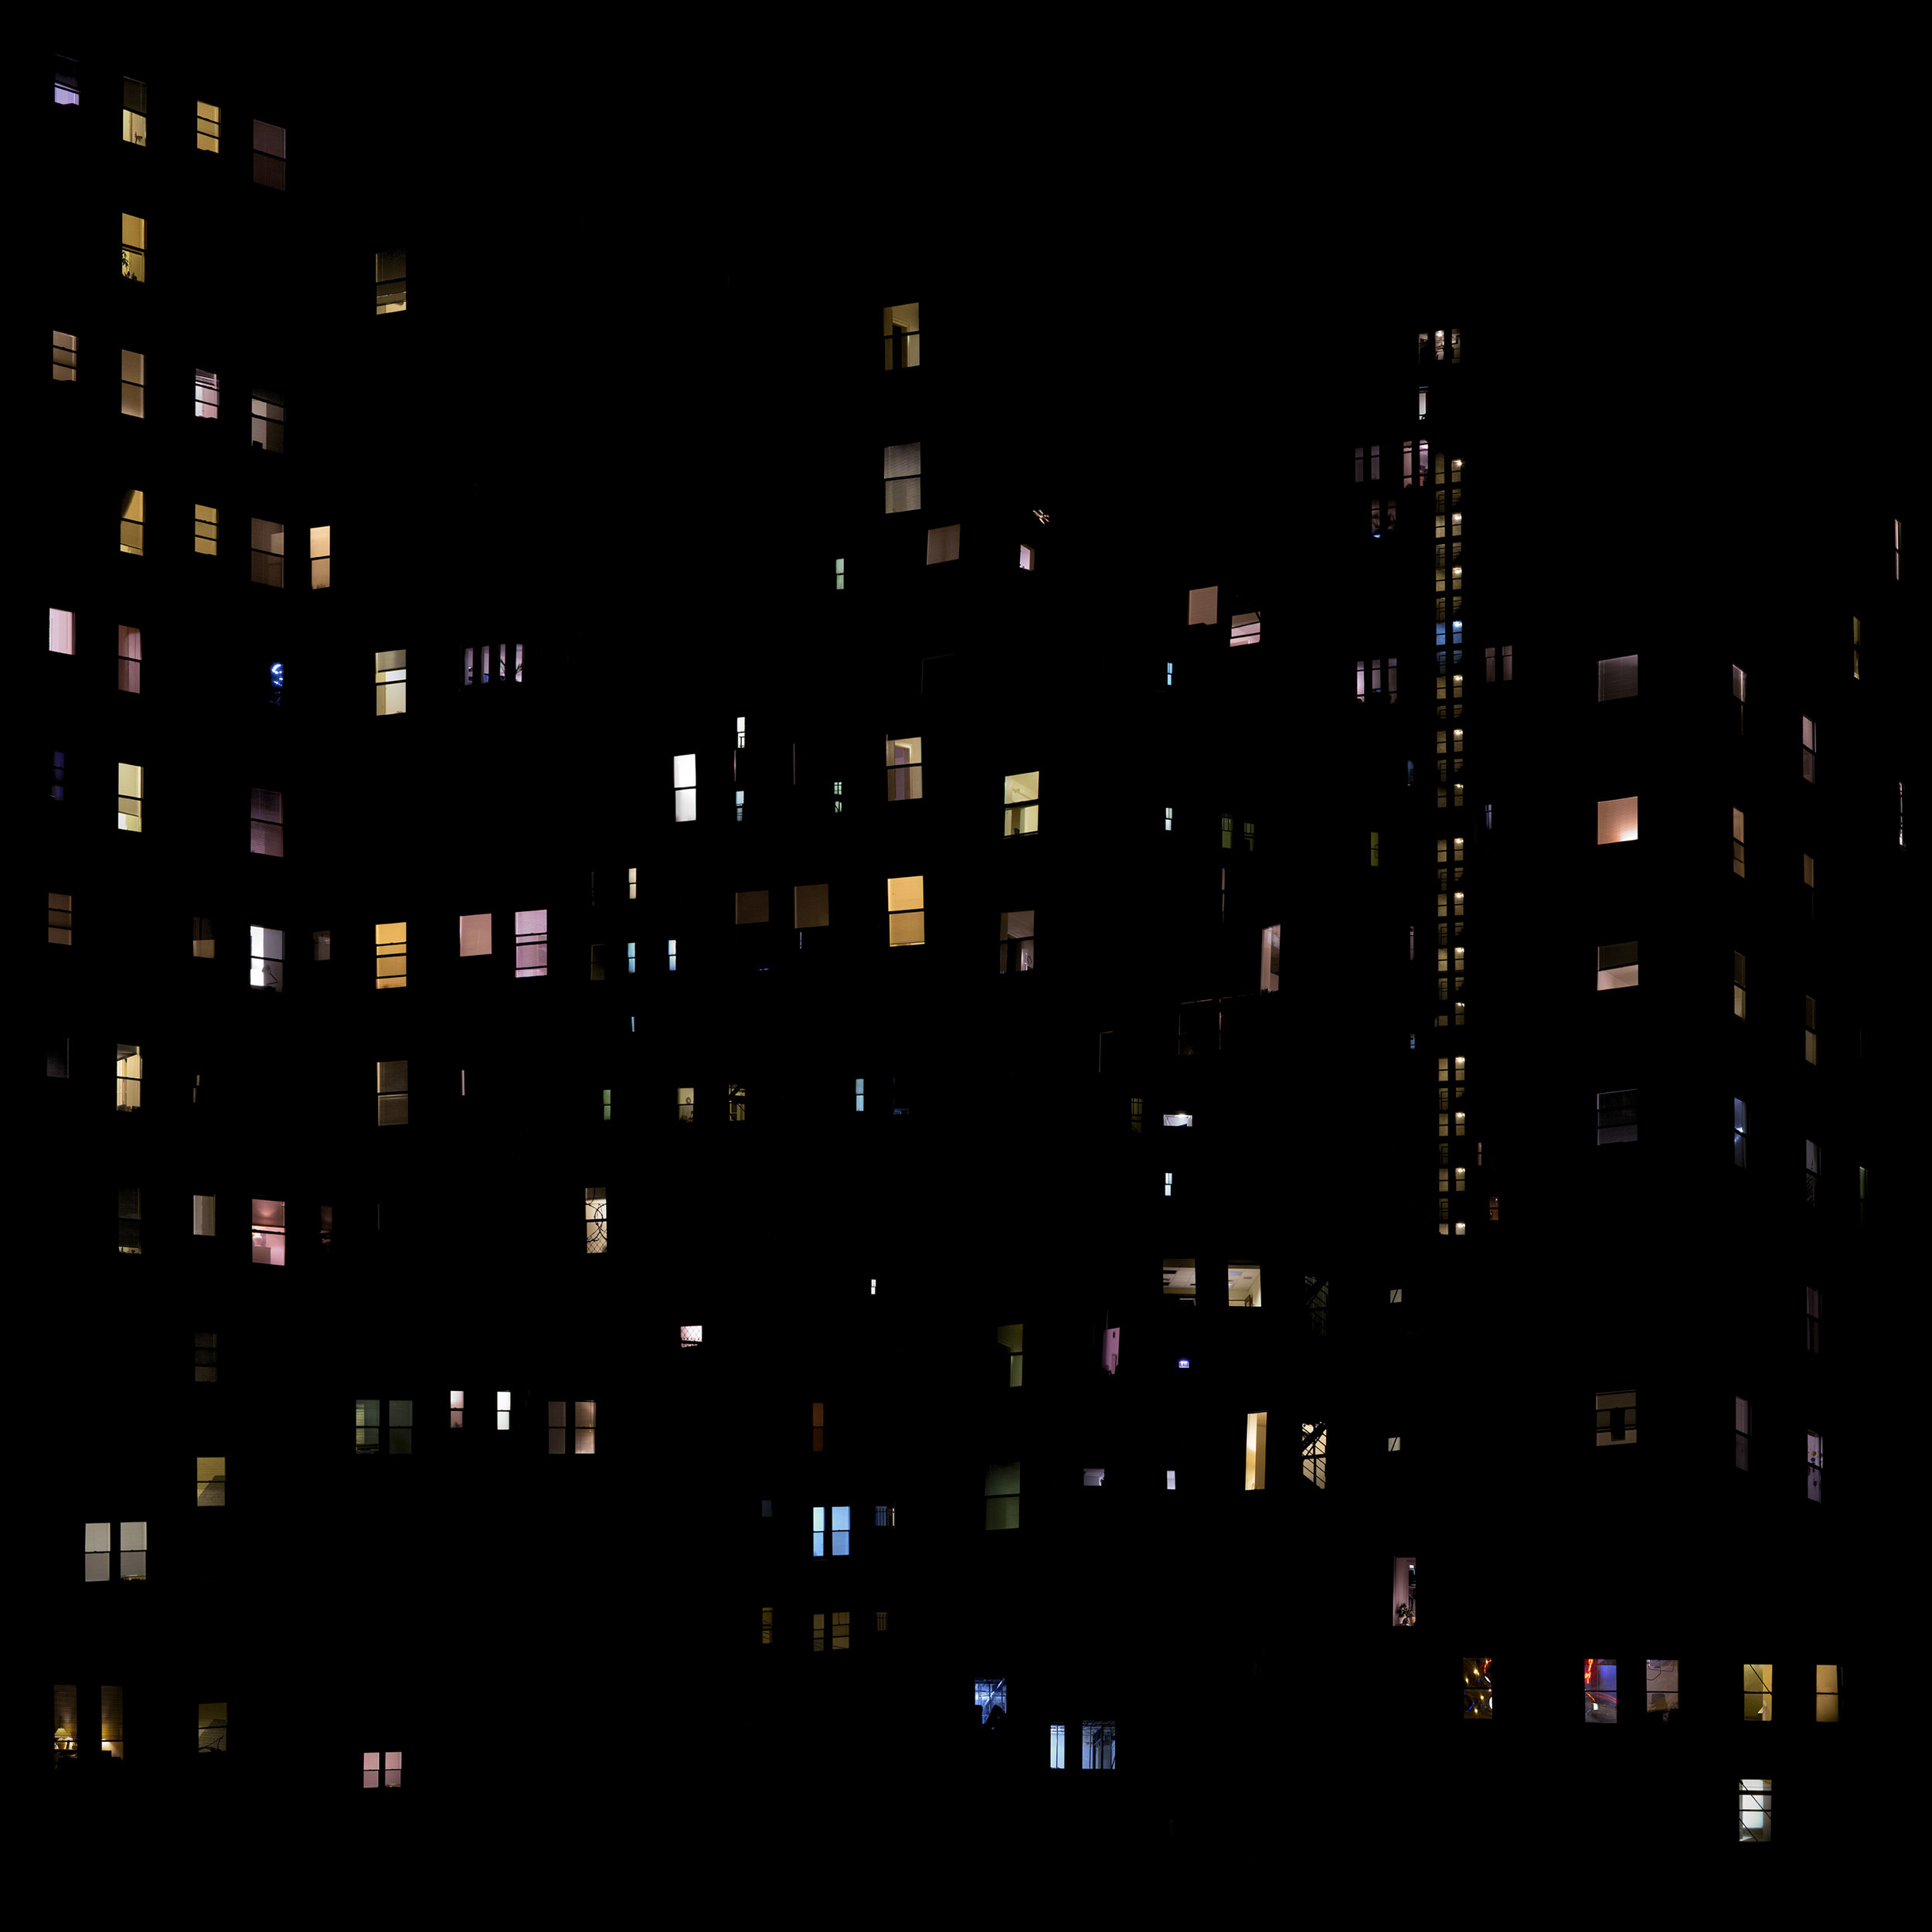 Windows from many apartment buildings 